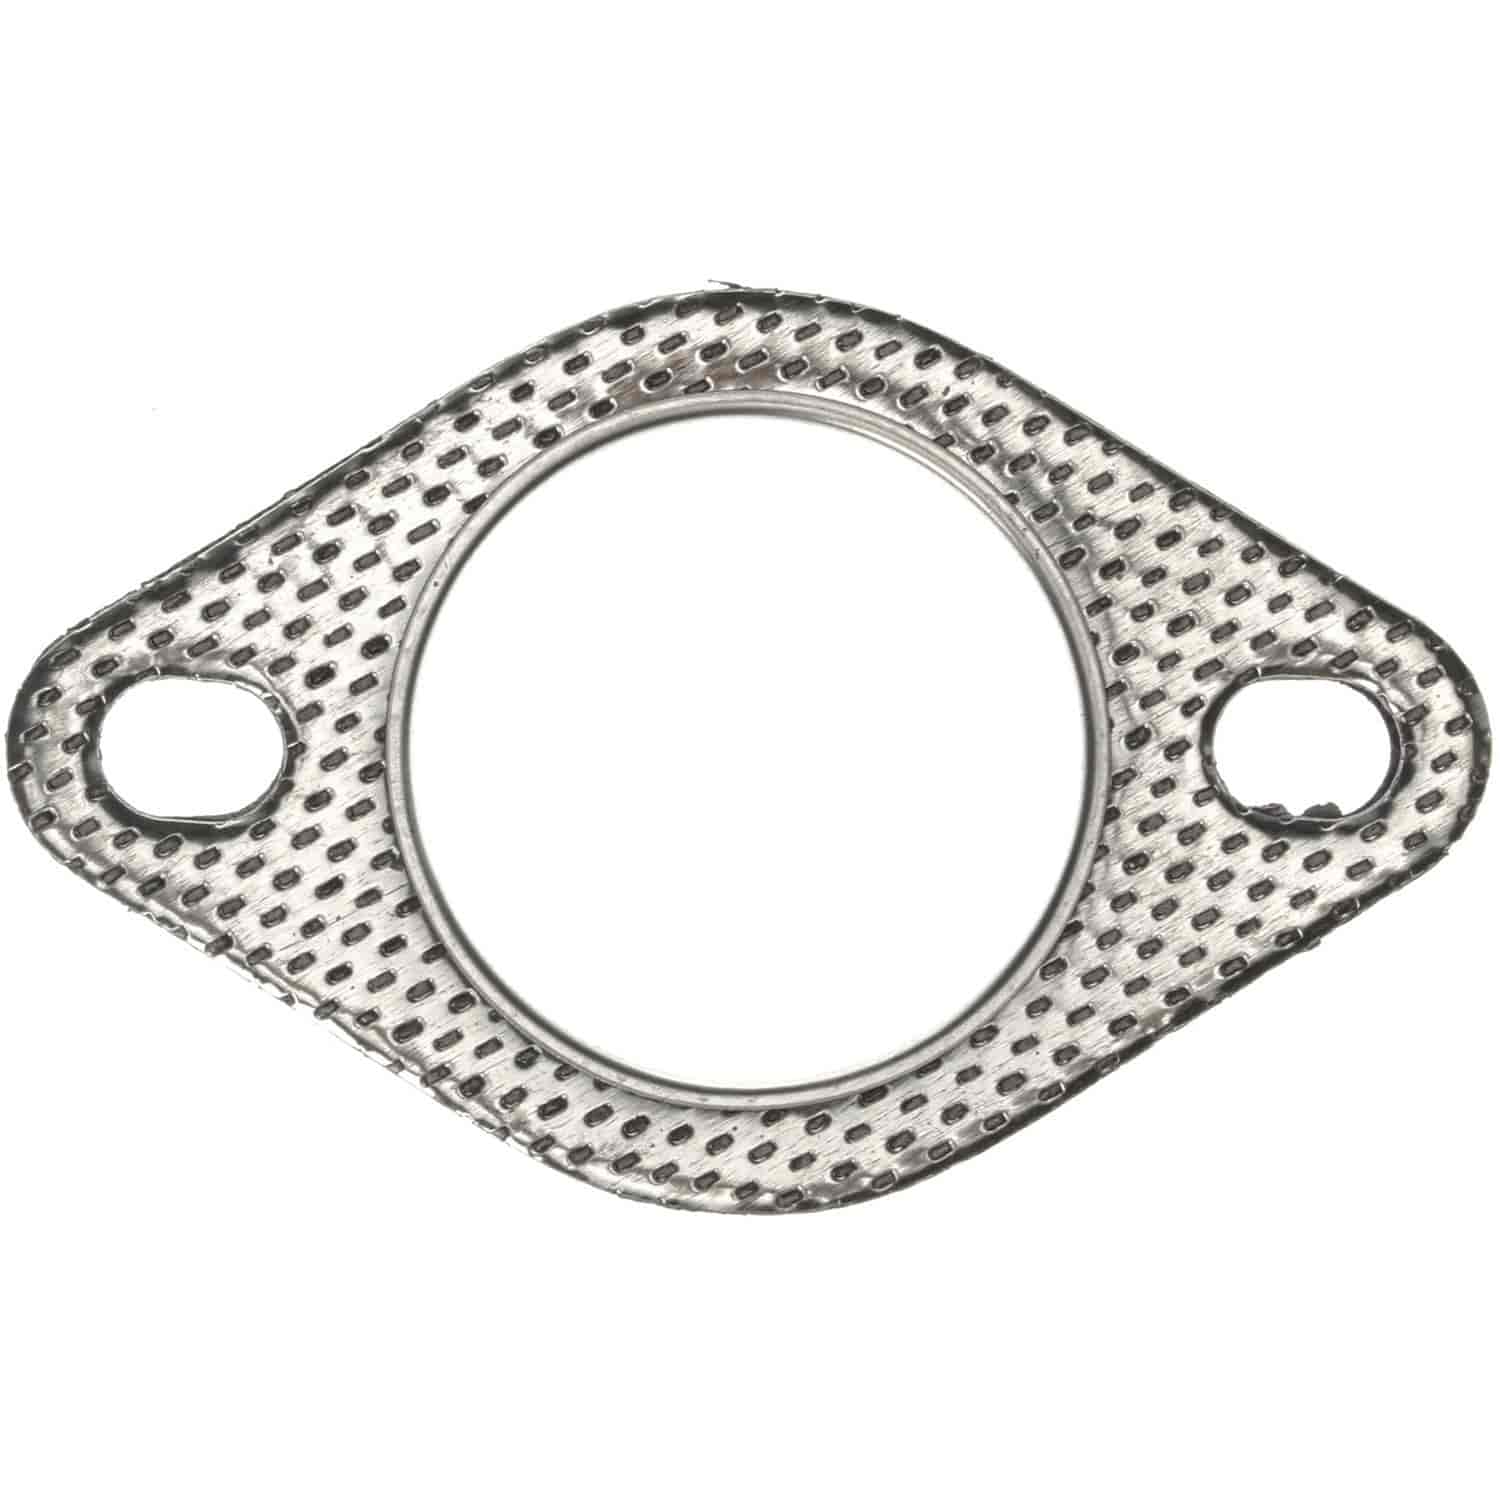 Exhaust Pipe Flange Gasket Dod-Pass&Trk  Eagle  Mit-Pass&Trk  Ply-Pass&Trk 98 1.6L